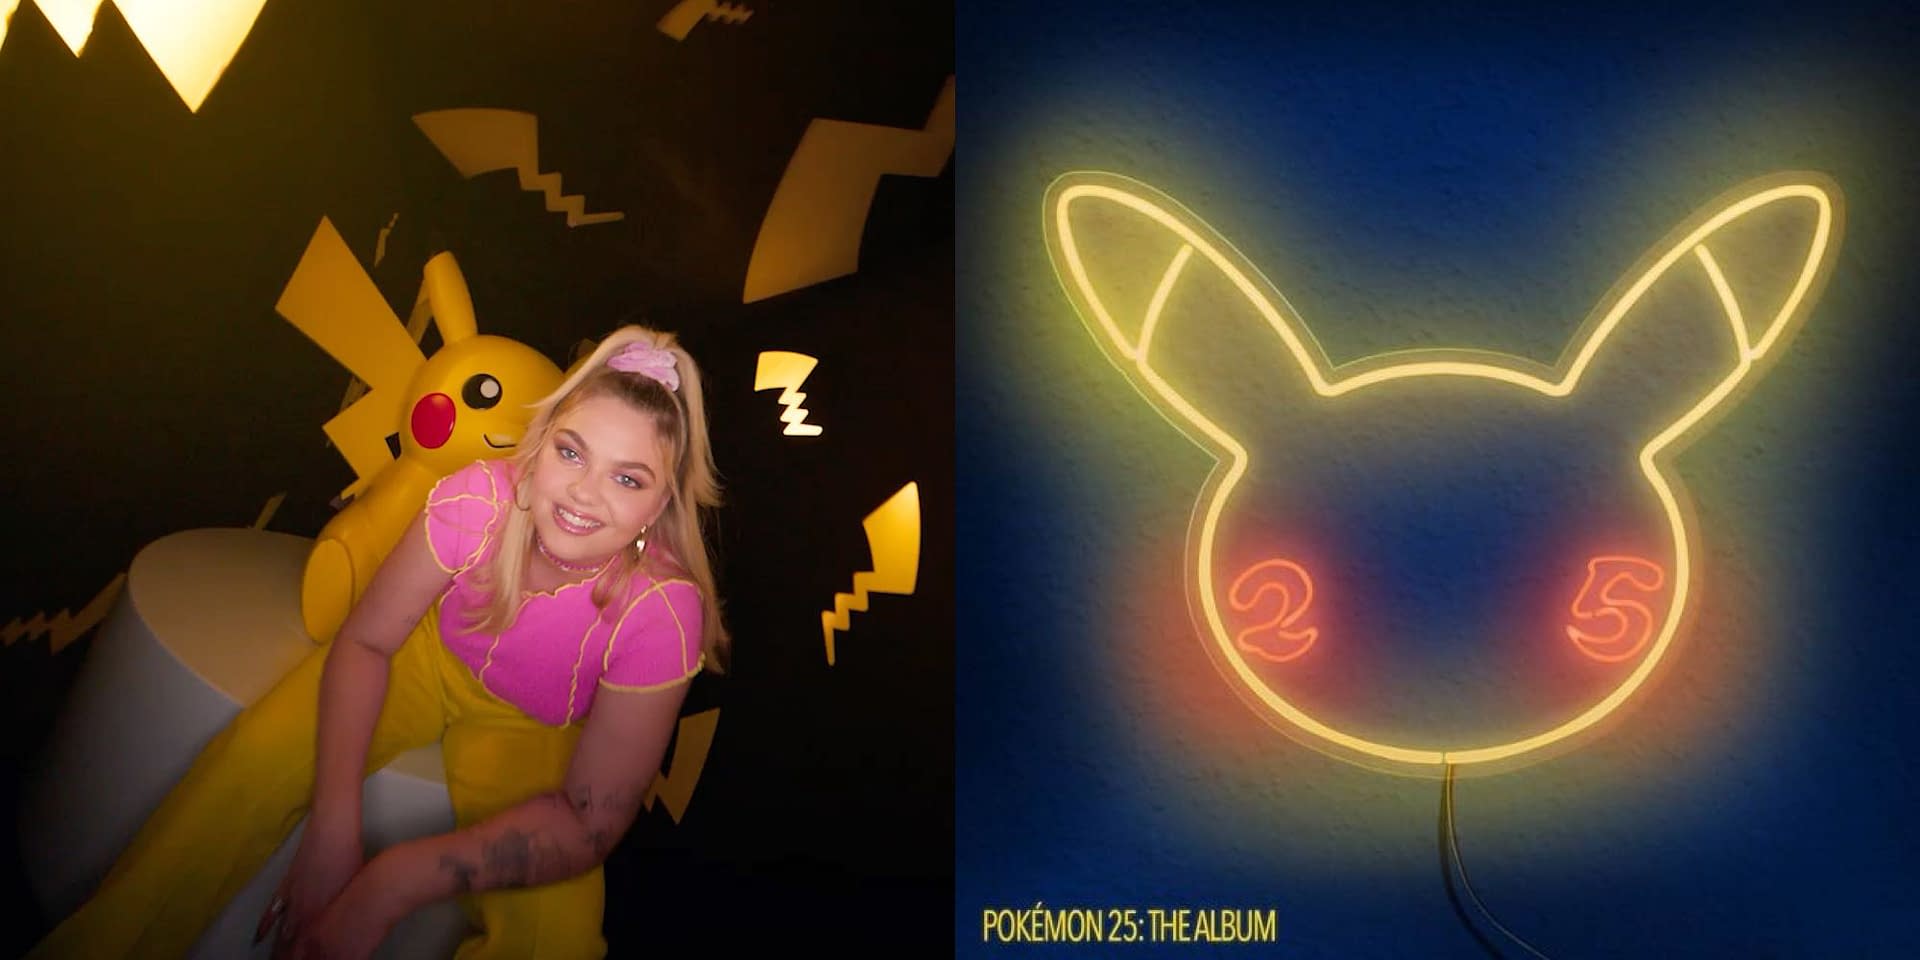 Pokémon Pairs With Singer Louane For “Game Girl” Song